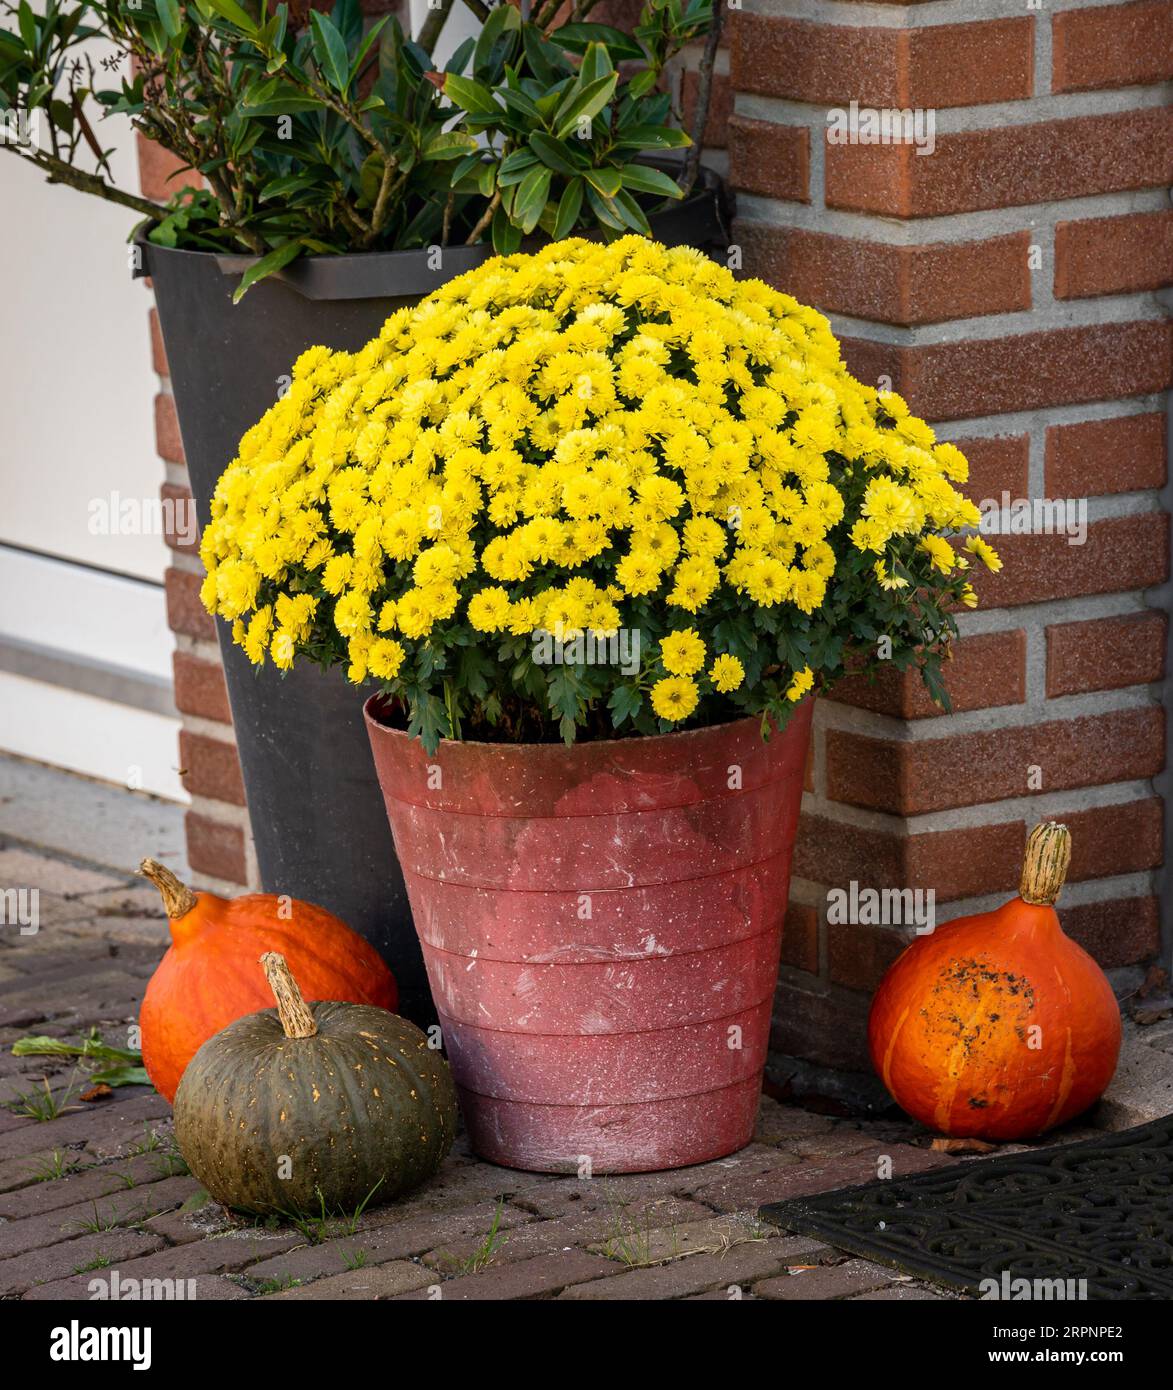 Decorative display of squashes and potted flowers in the street Stock Photo